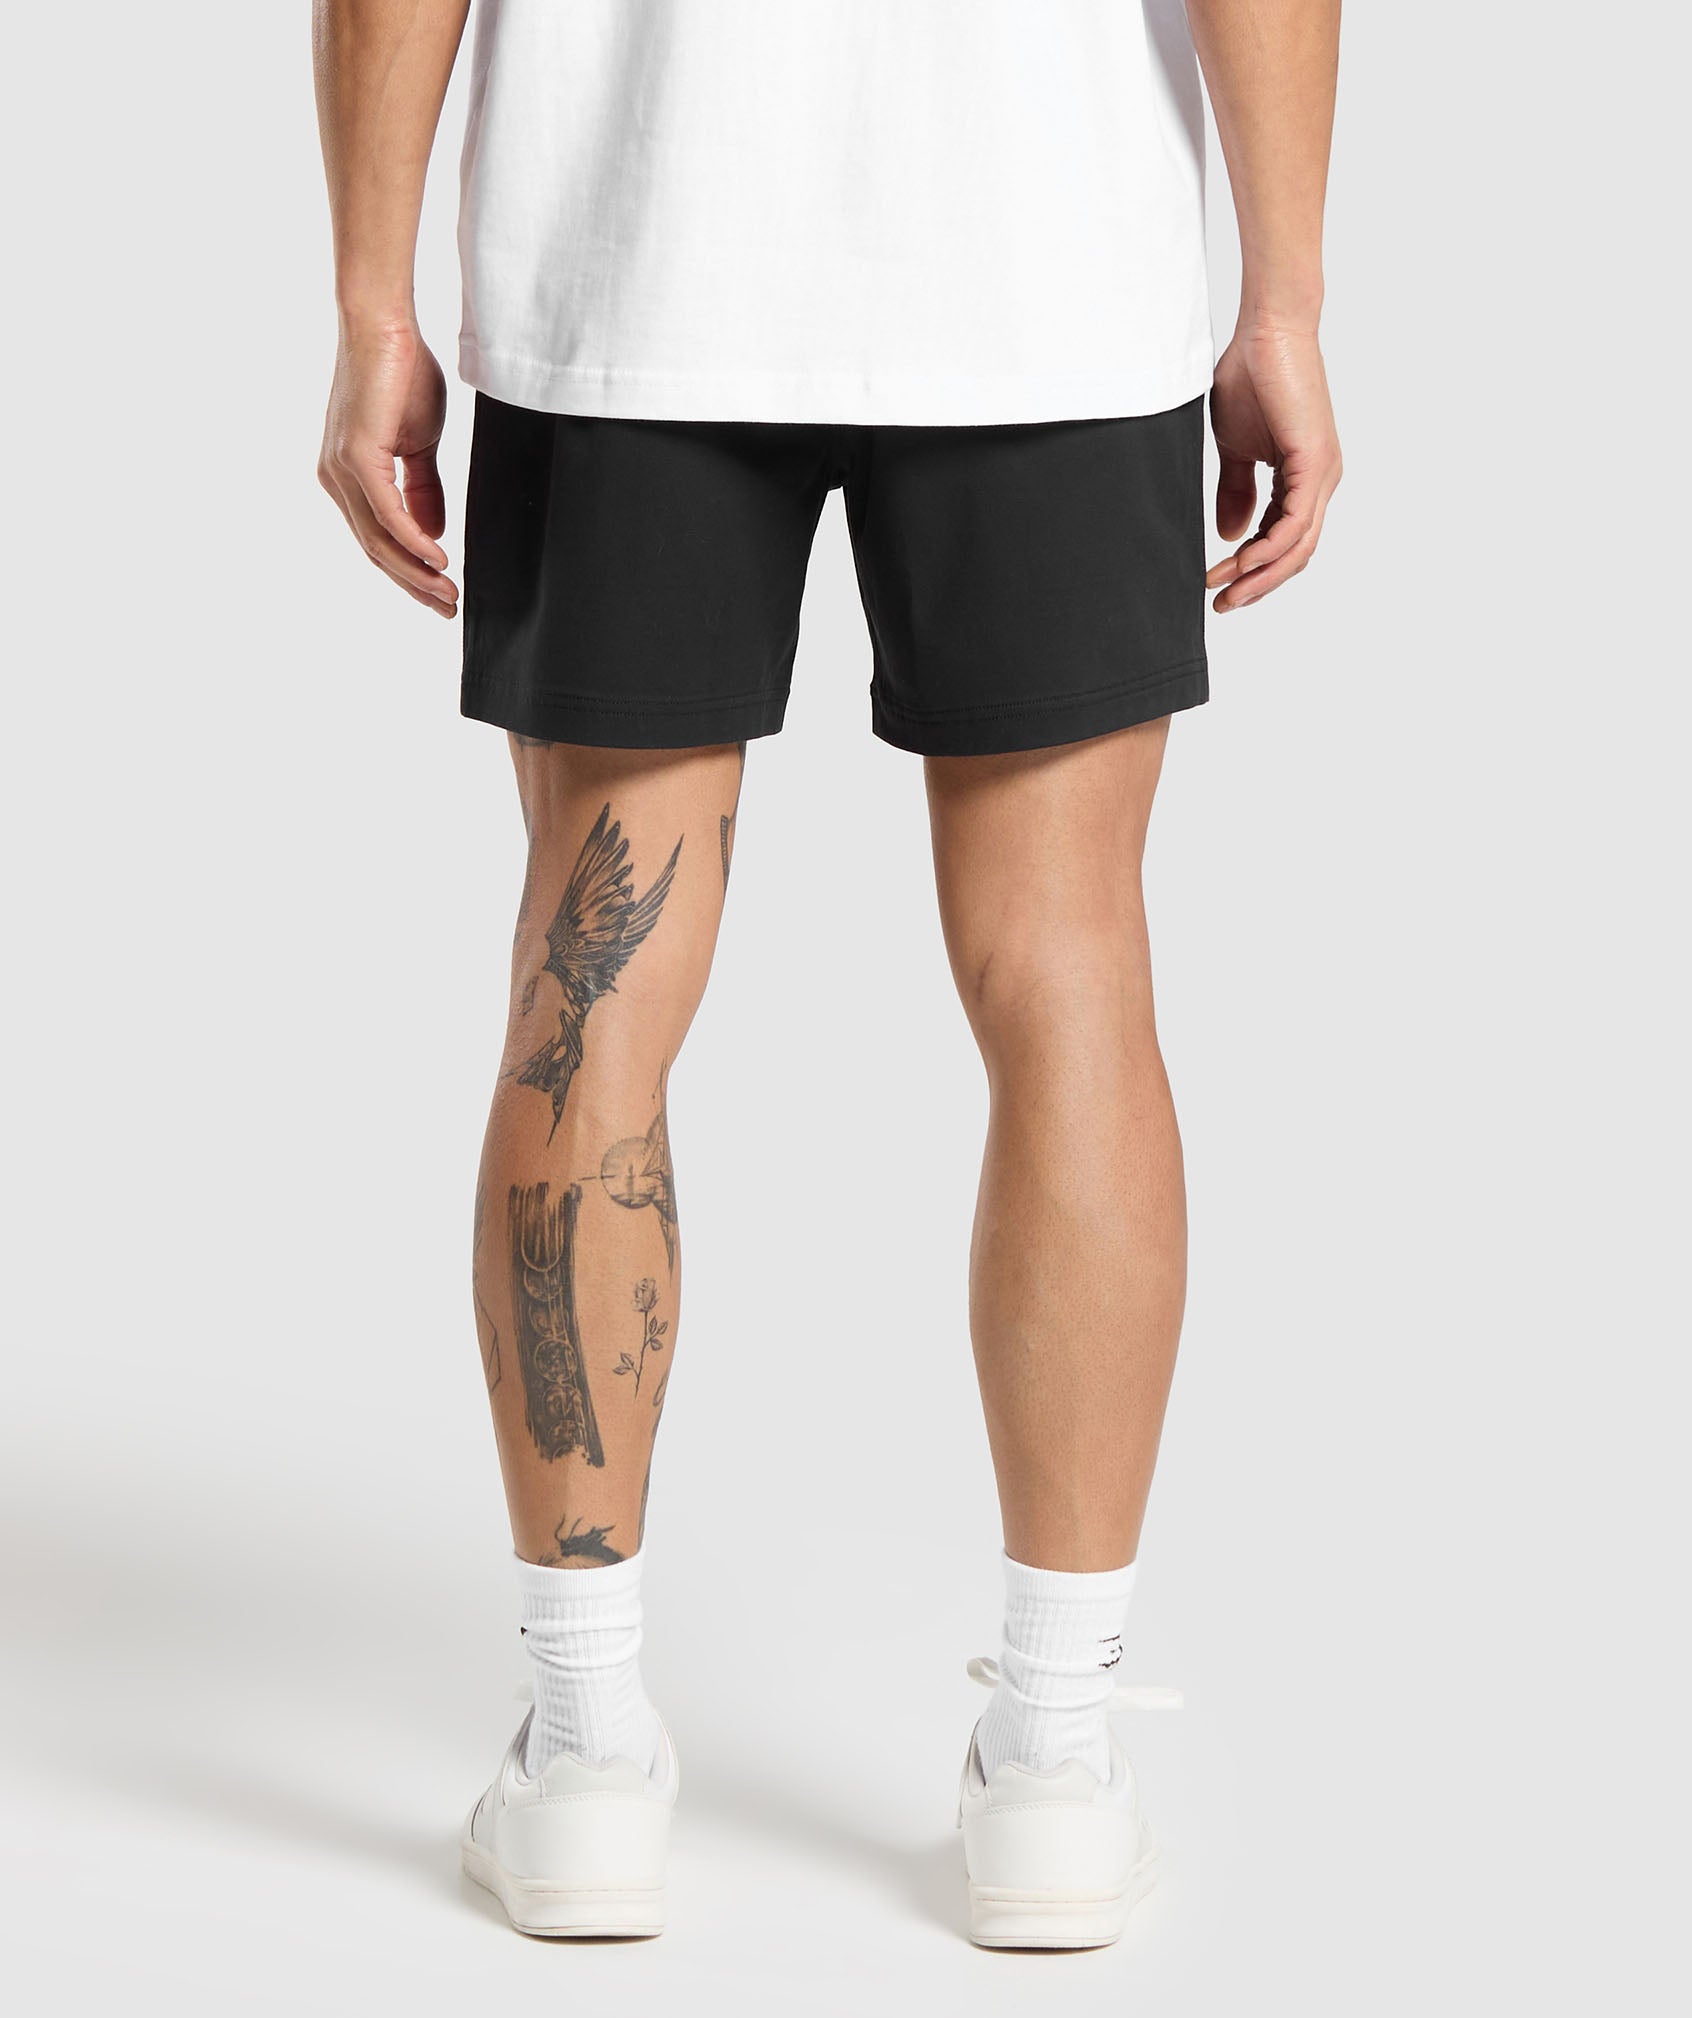 Rest Day Woven Shorts in Black - view 2